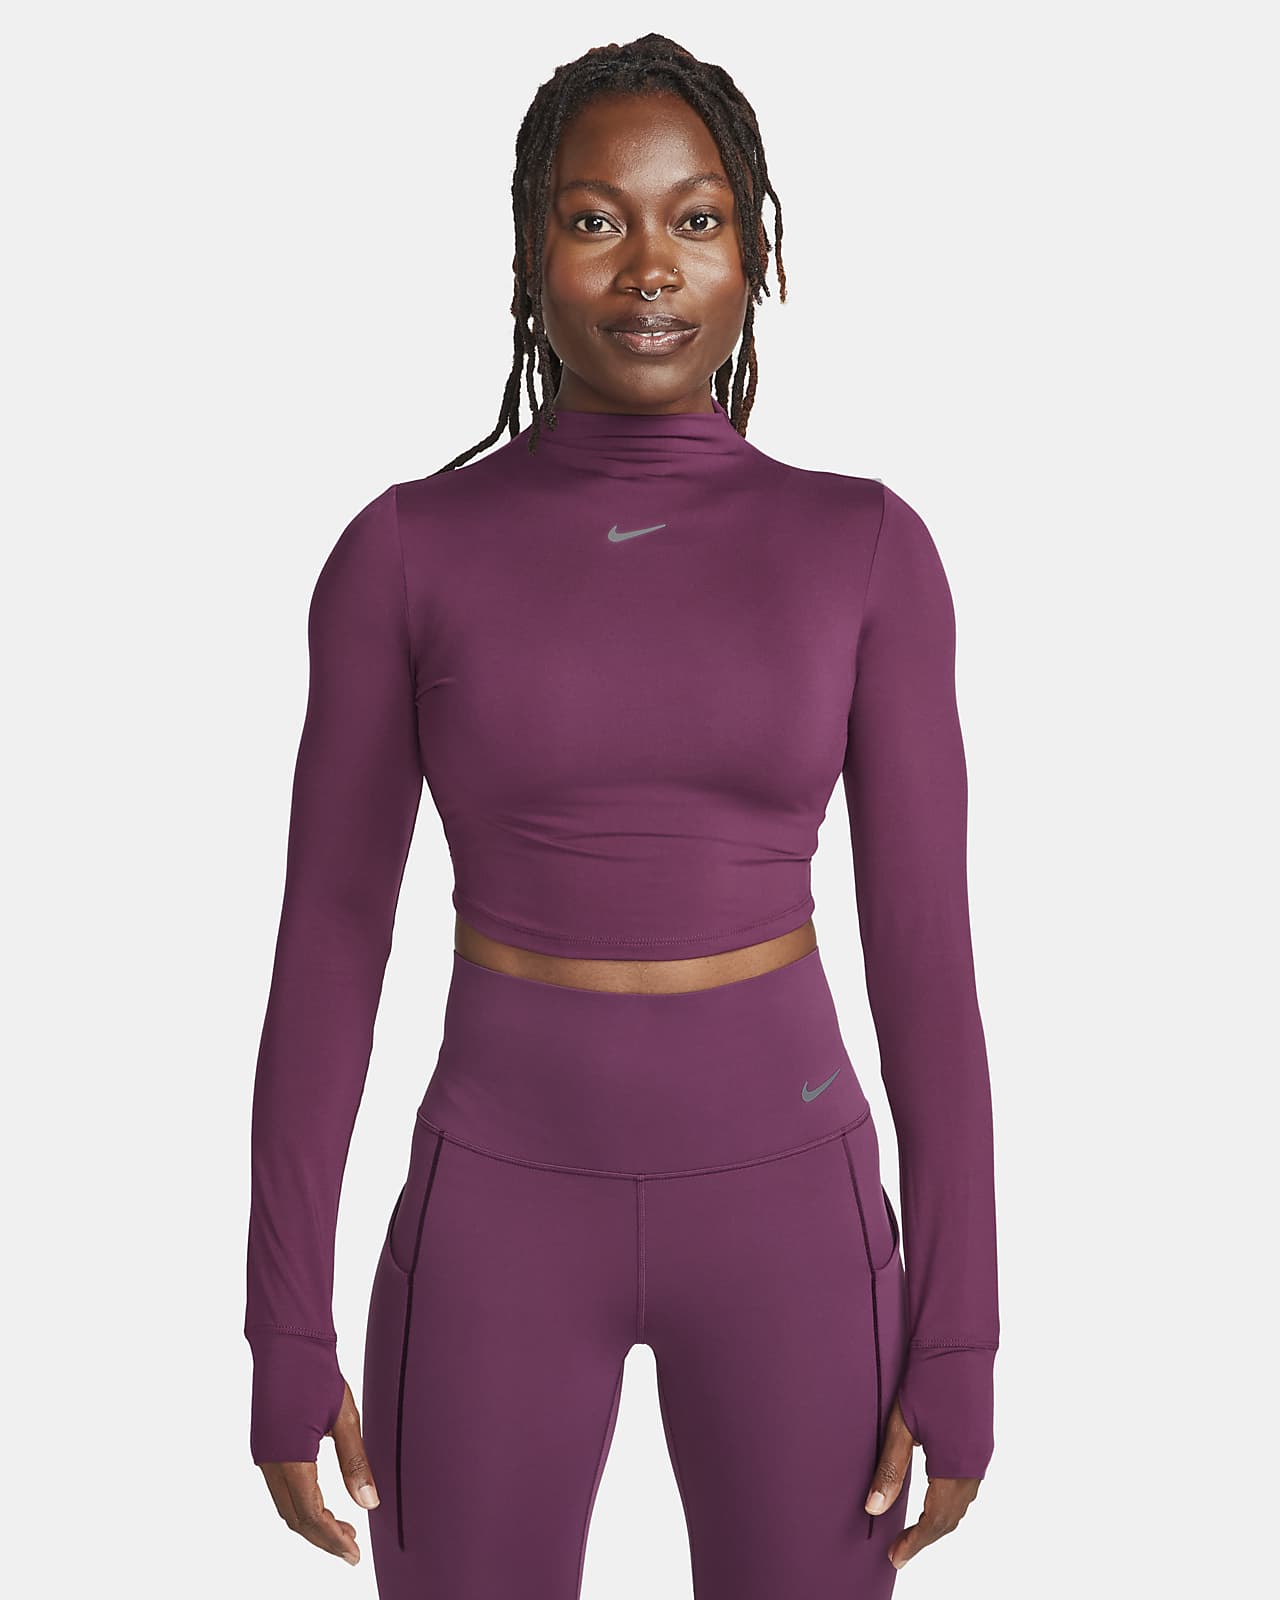 $130 NEW Women's Nike Run Division Epic Luxe Dri-FIT Running